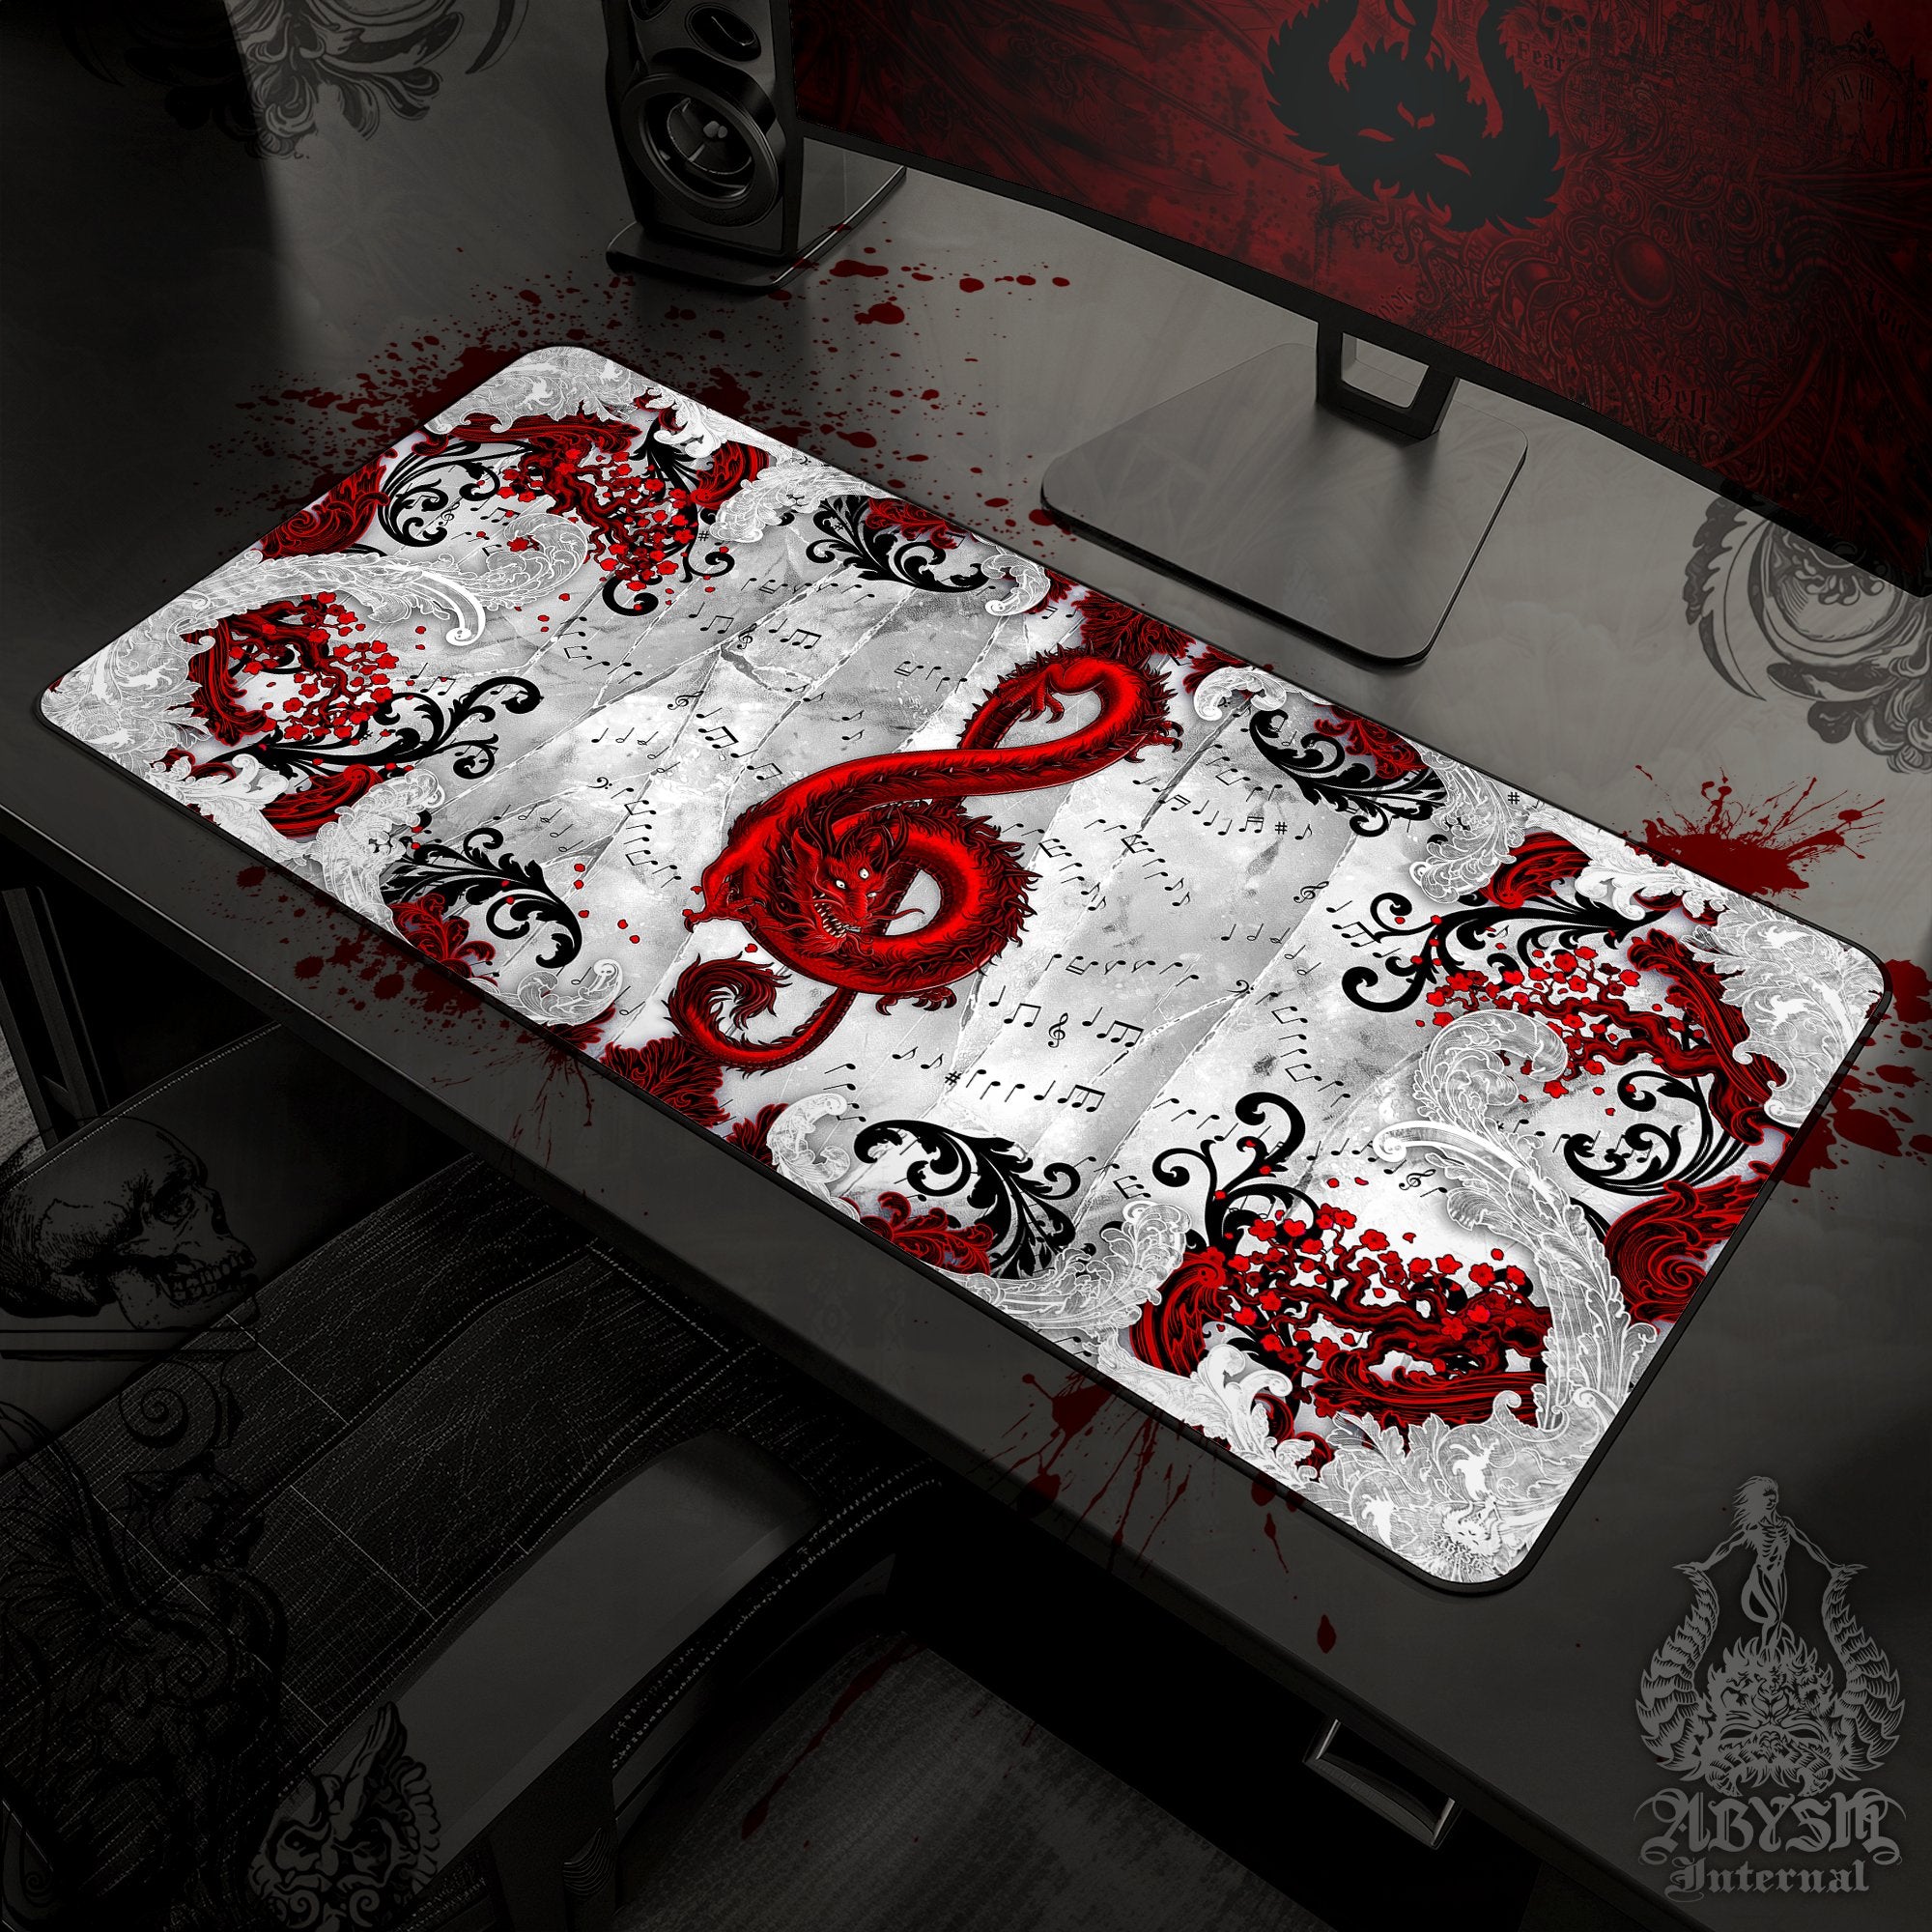 Music Mouse Pad, Red Dragon Gaming Desk Mat, Asian Workpad, Bloody White Goth Table Protector Cover, Treble Clef Art Print - Abysm Internal